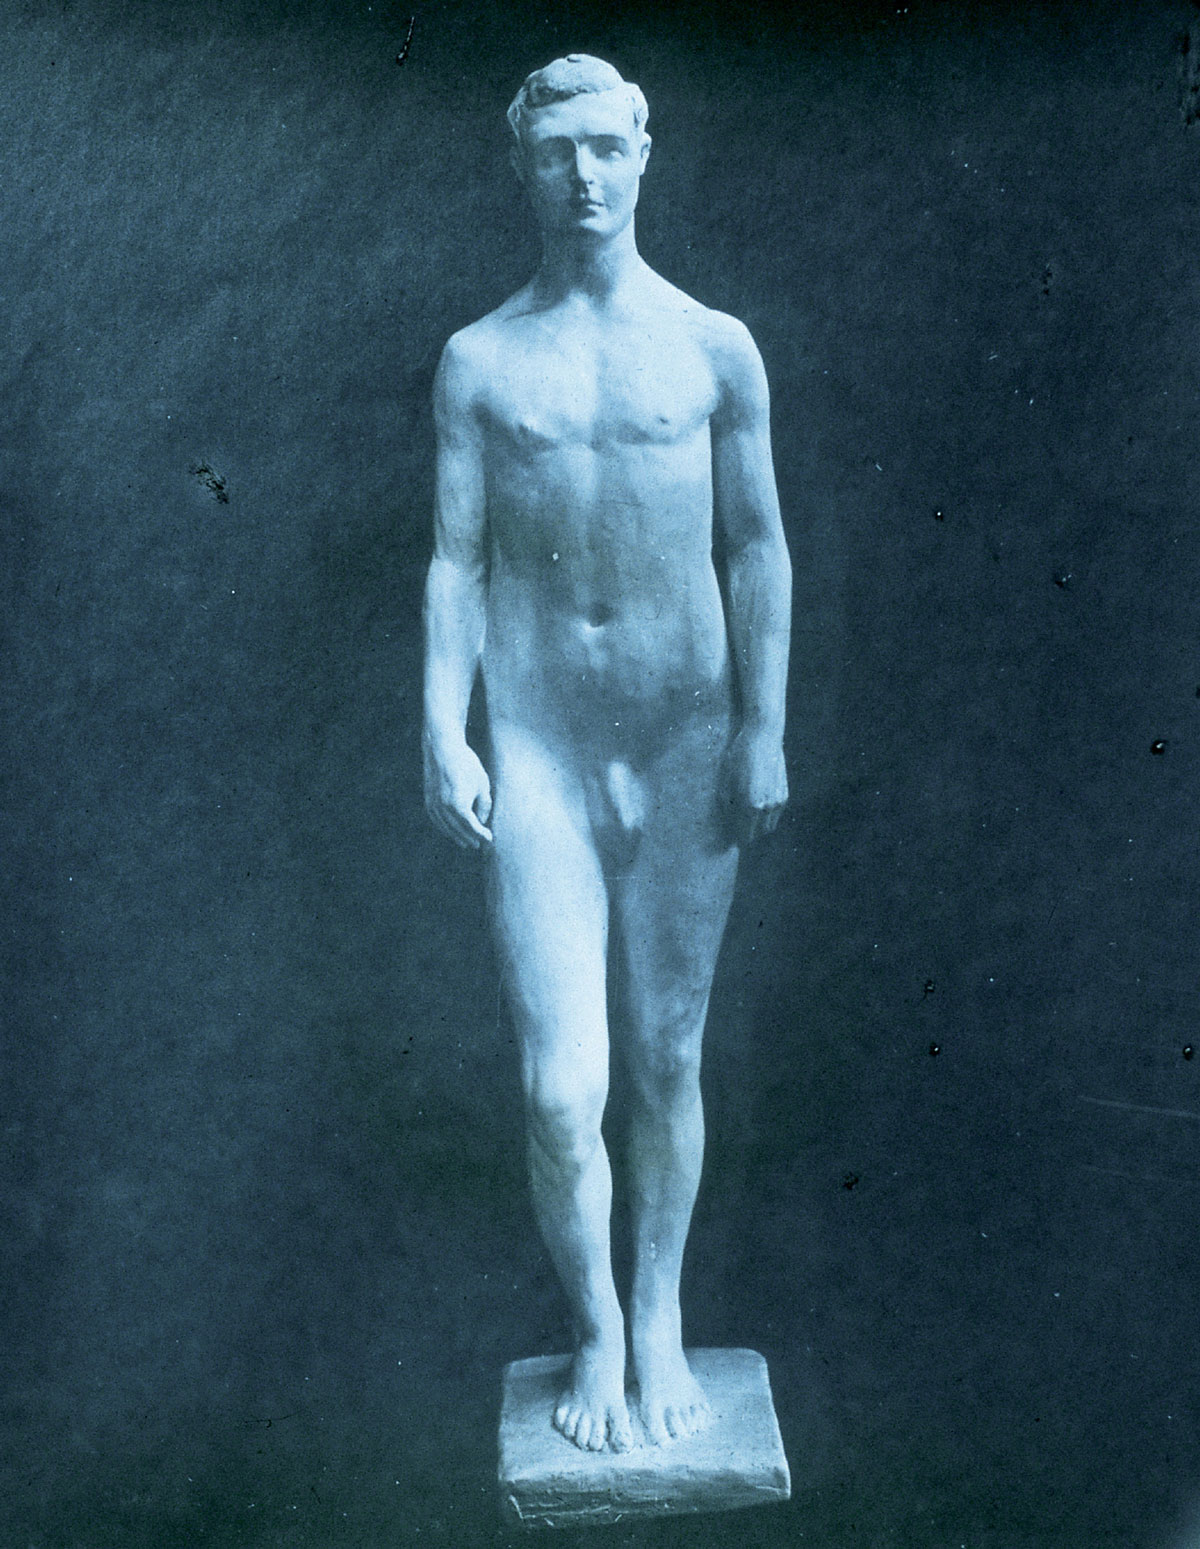 Jane Davenport’s statuette of man, sculpted with the average
proportions of 100,000 white soldiers as determined by the United States
War Department. Courtesy Truman State University and Cold Spring Harbor Laboratory.